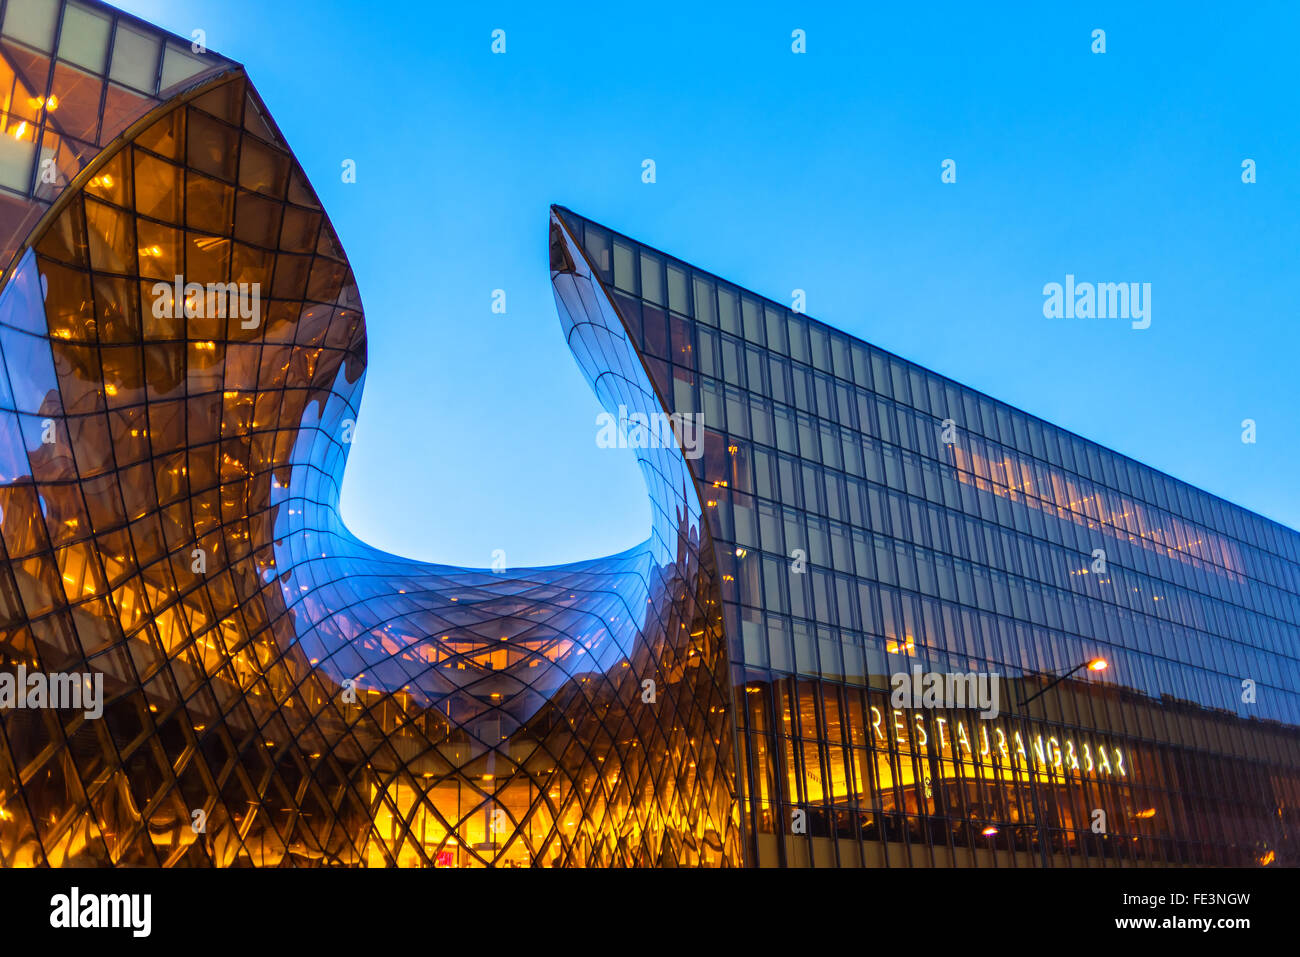 MALMO, SWEDEN - DECEMBER 30, 2015: Emporia Shopping Center, detail of  modern architecture and largest shopping mall in Scandinav Stock Photo -  Alamy